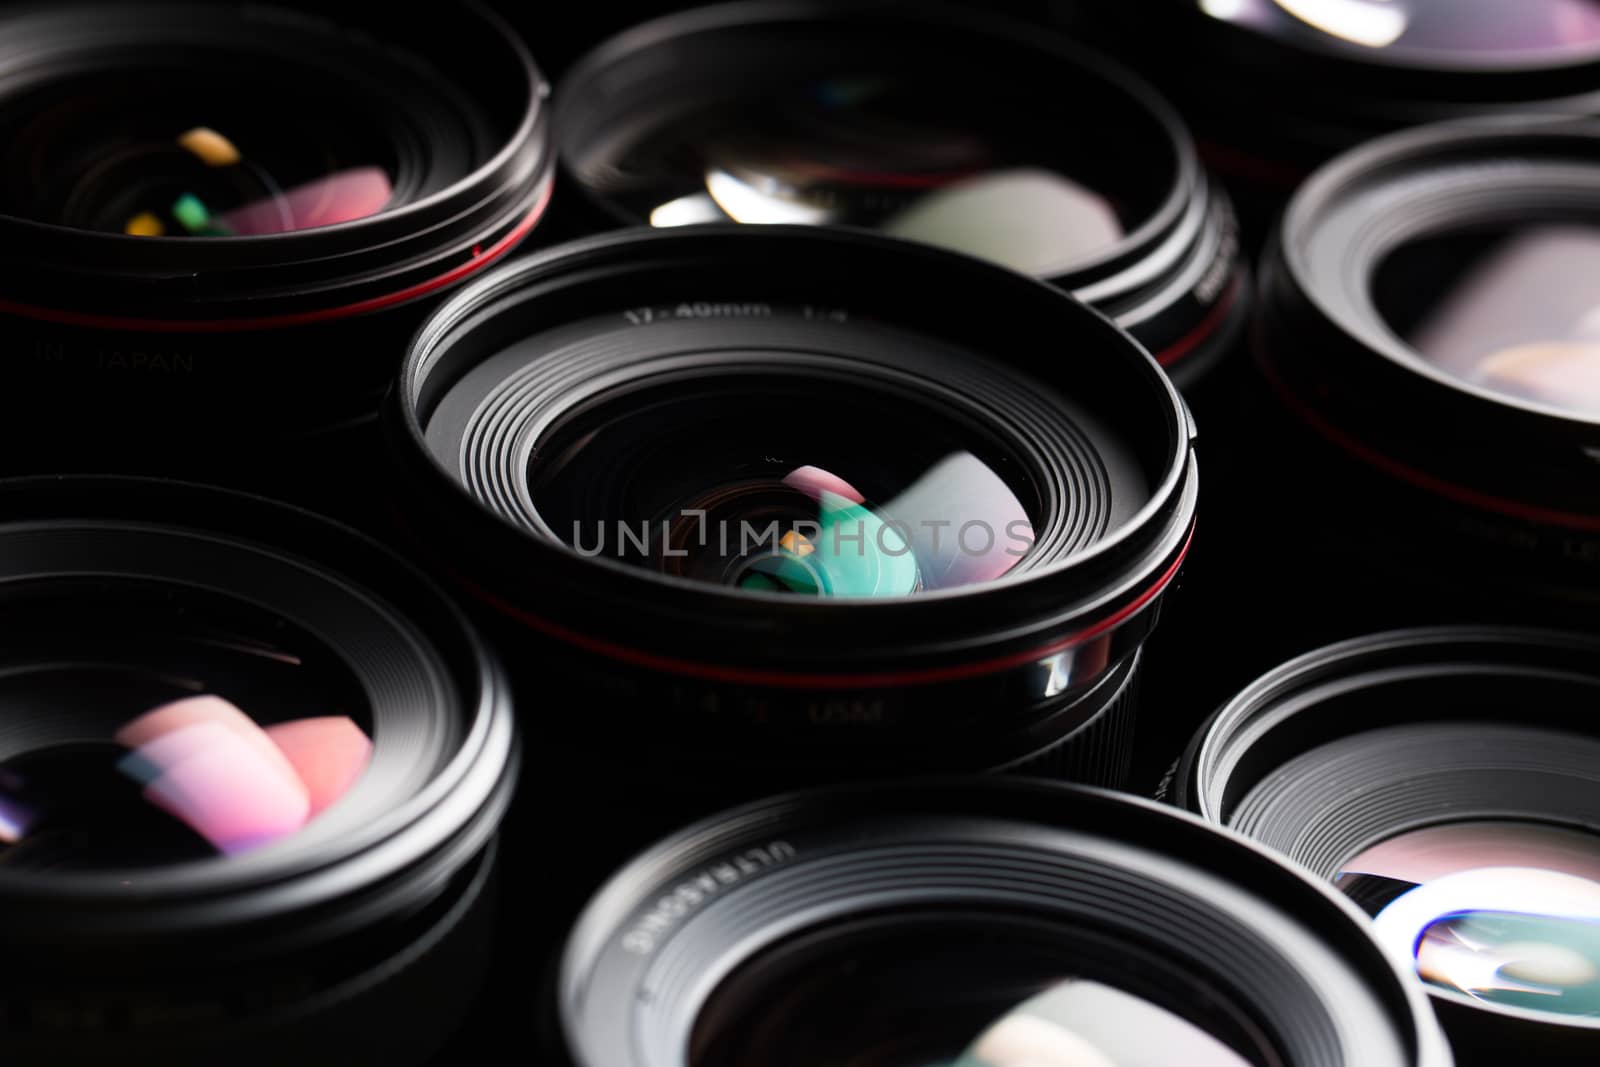 Modern camera lenses with reflections, low key image by viktor_cap